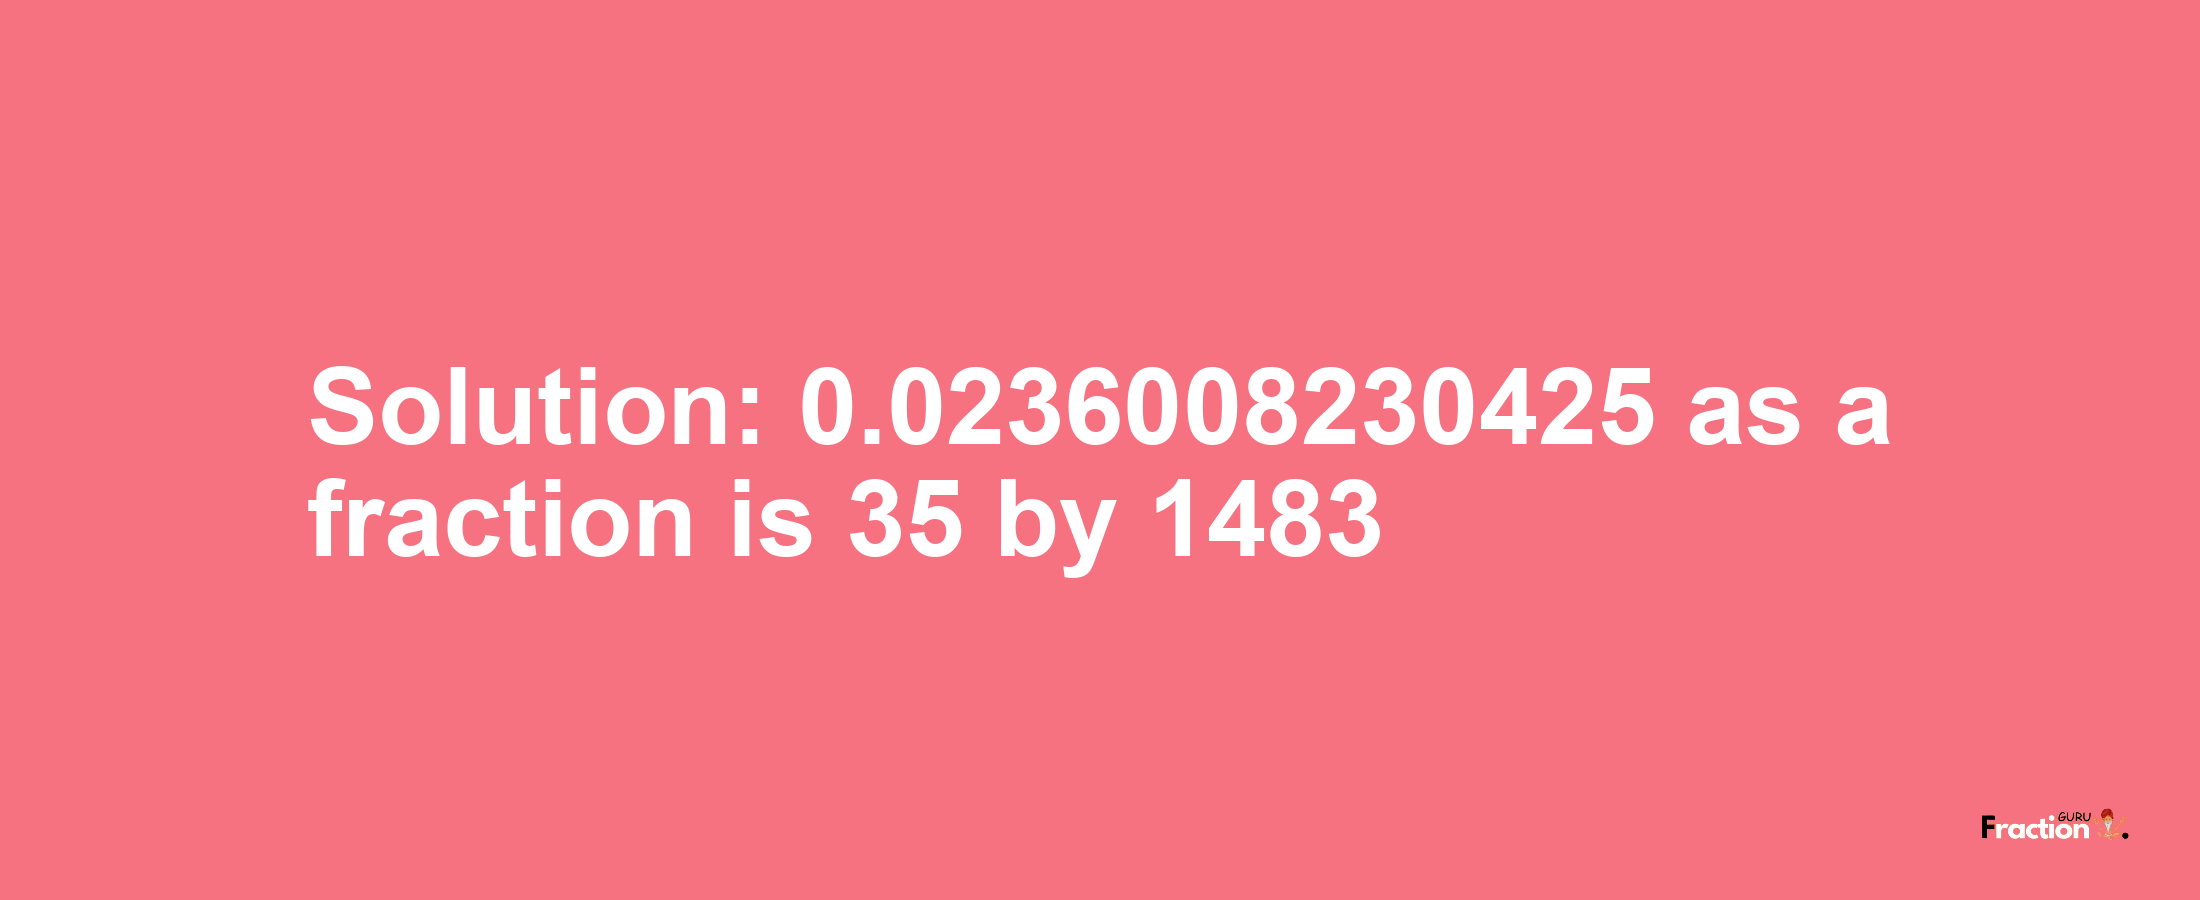 Solution:0.0236008230425 as a fraction is 35/1483